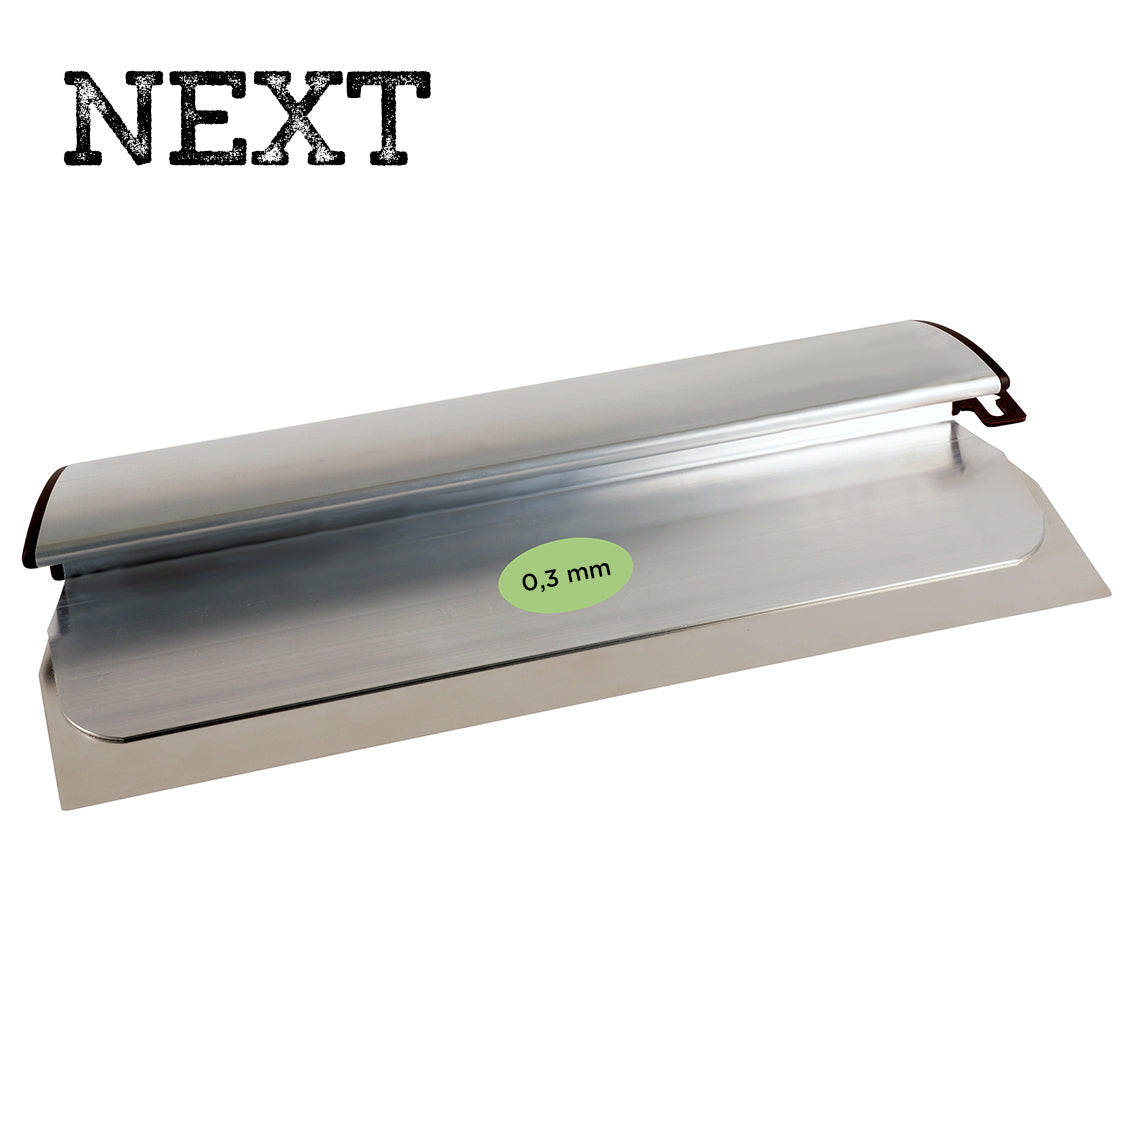 Super Prof, Comfort Profile NEXT, stainless steel -  1200mm x 0,3 mm